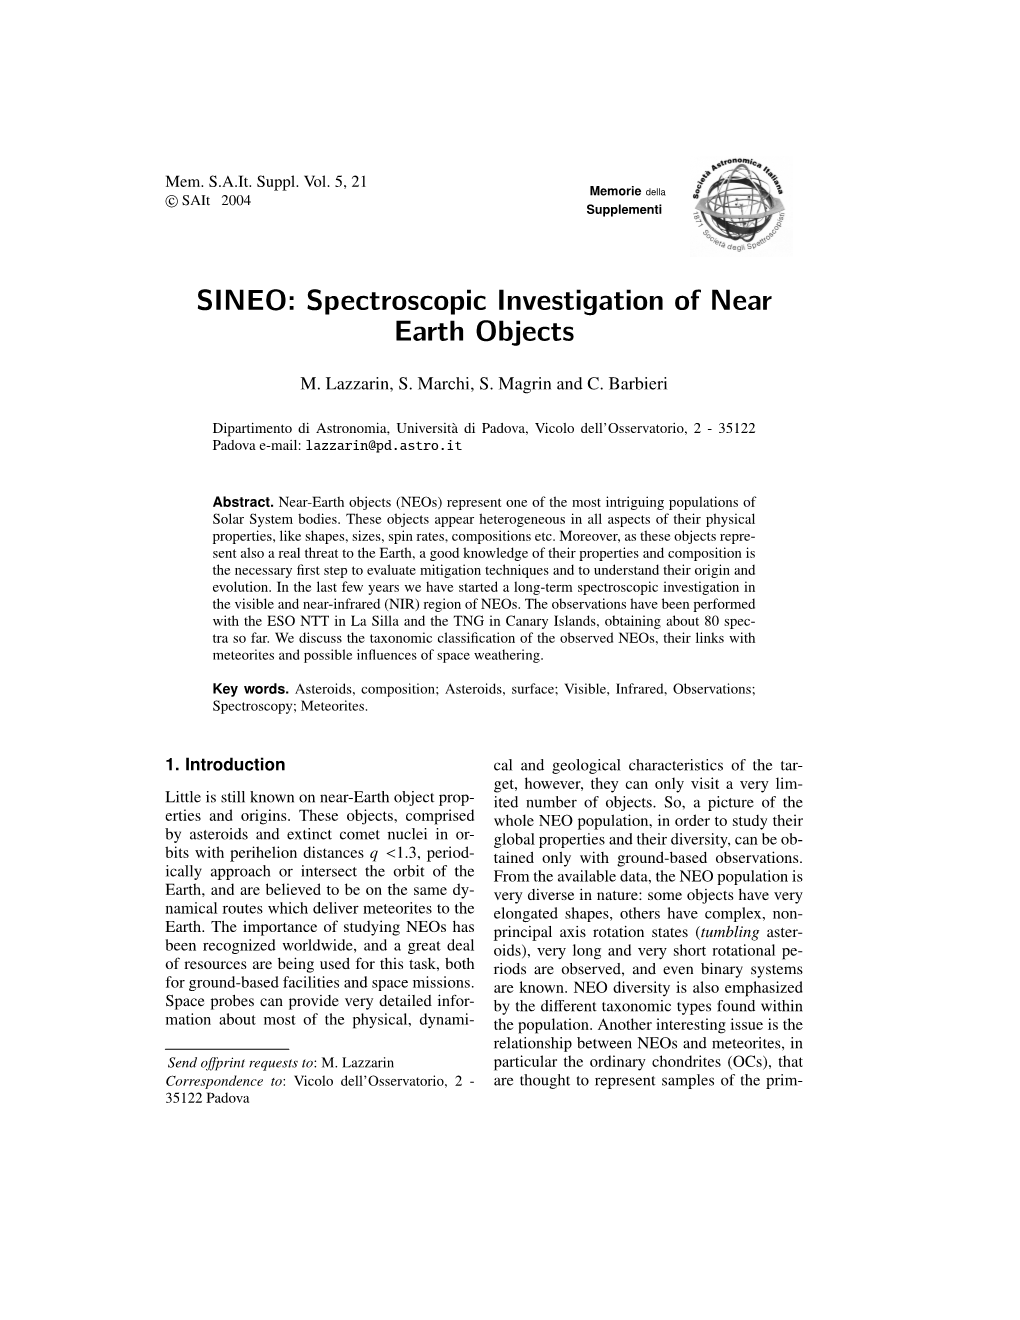 SINEO: Spectroscopic Investigation of Near Earth Objects